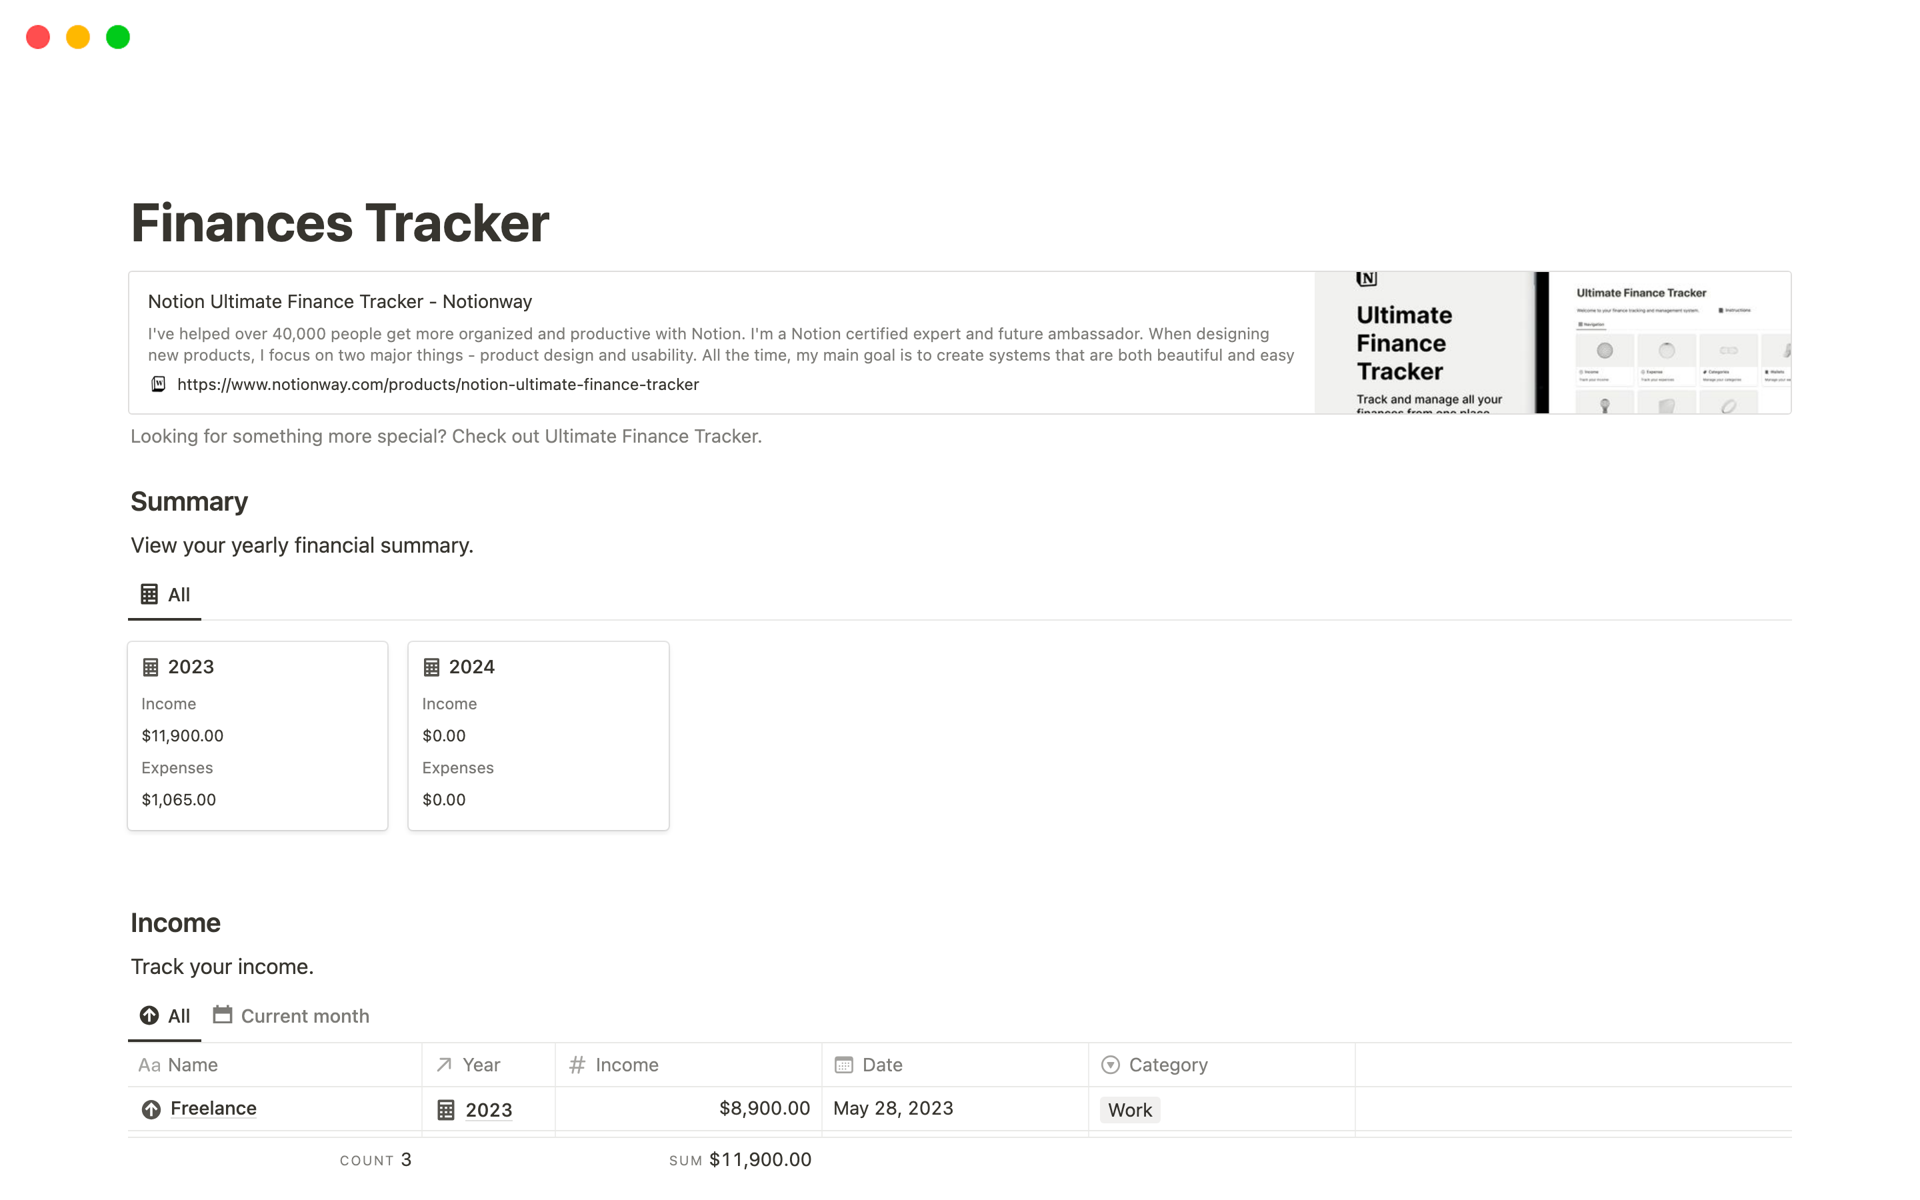 Track your income and expenses, and learn from automatic summaries.